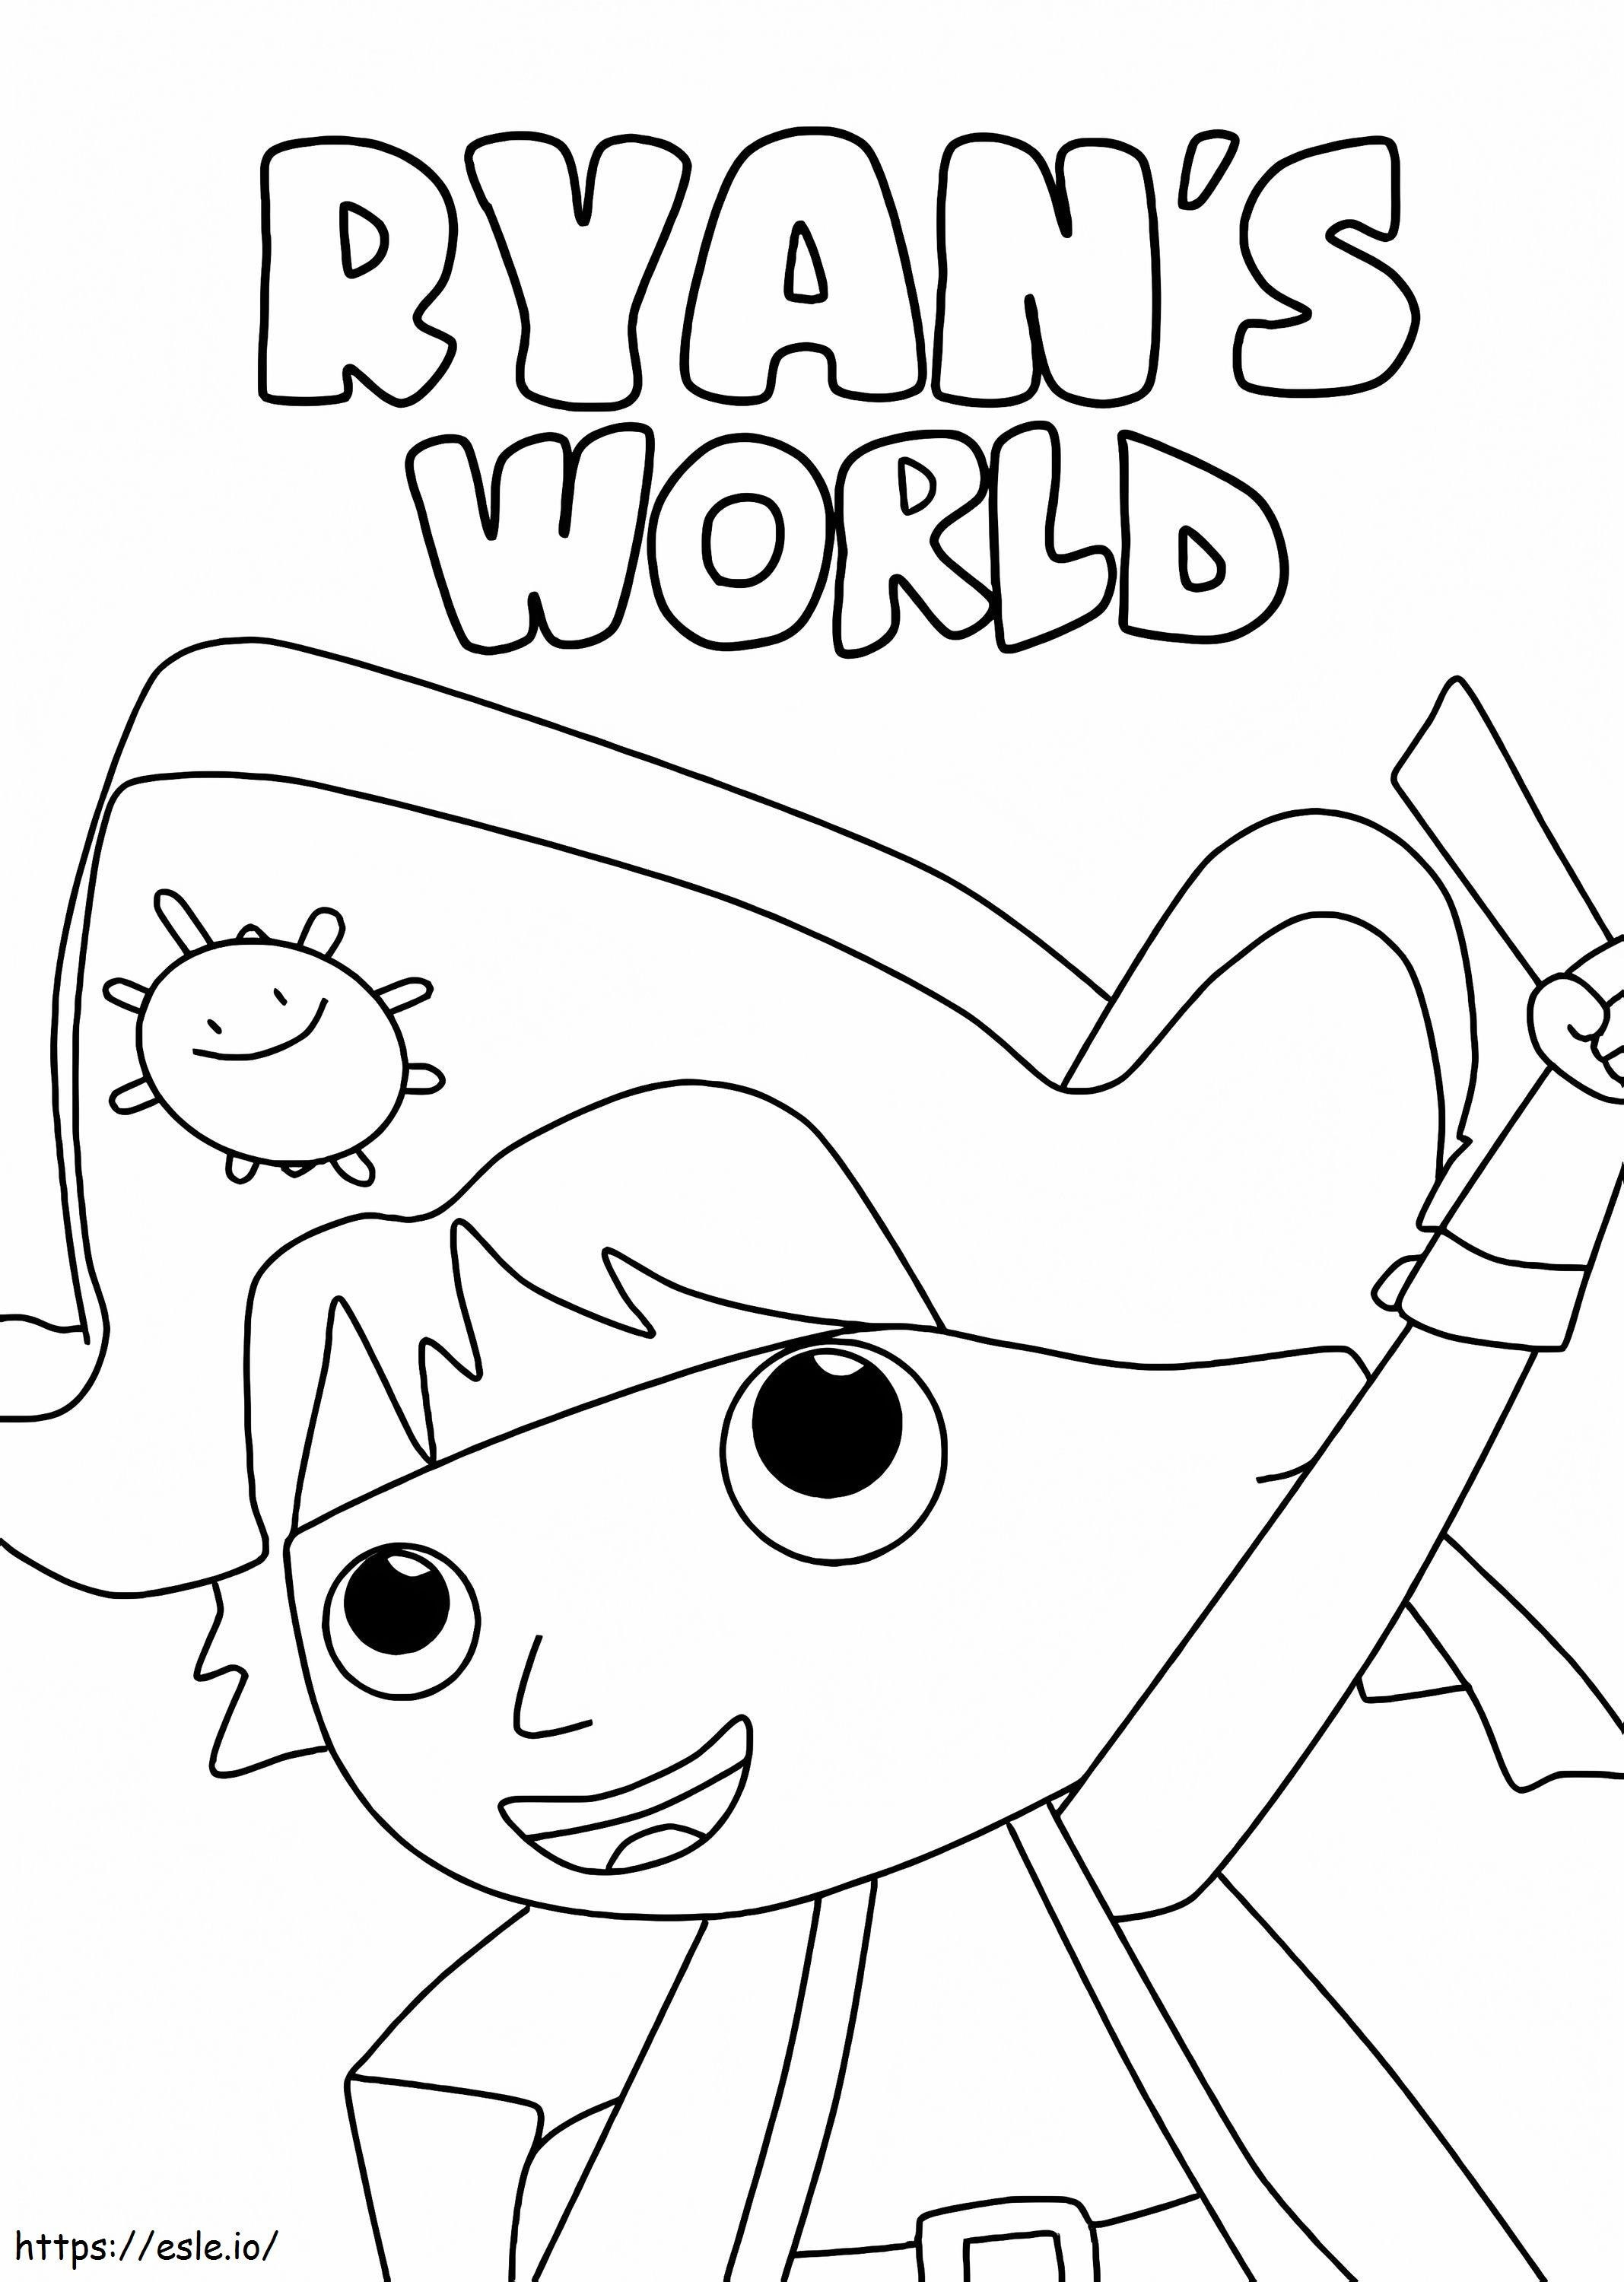 Pirate Game Ryan'S World coloring page